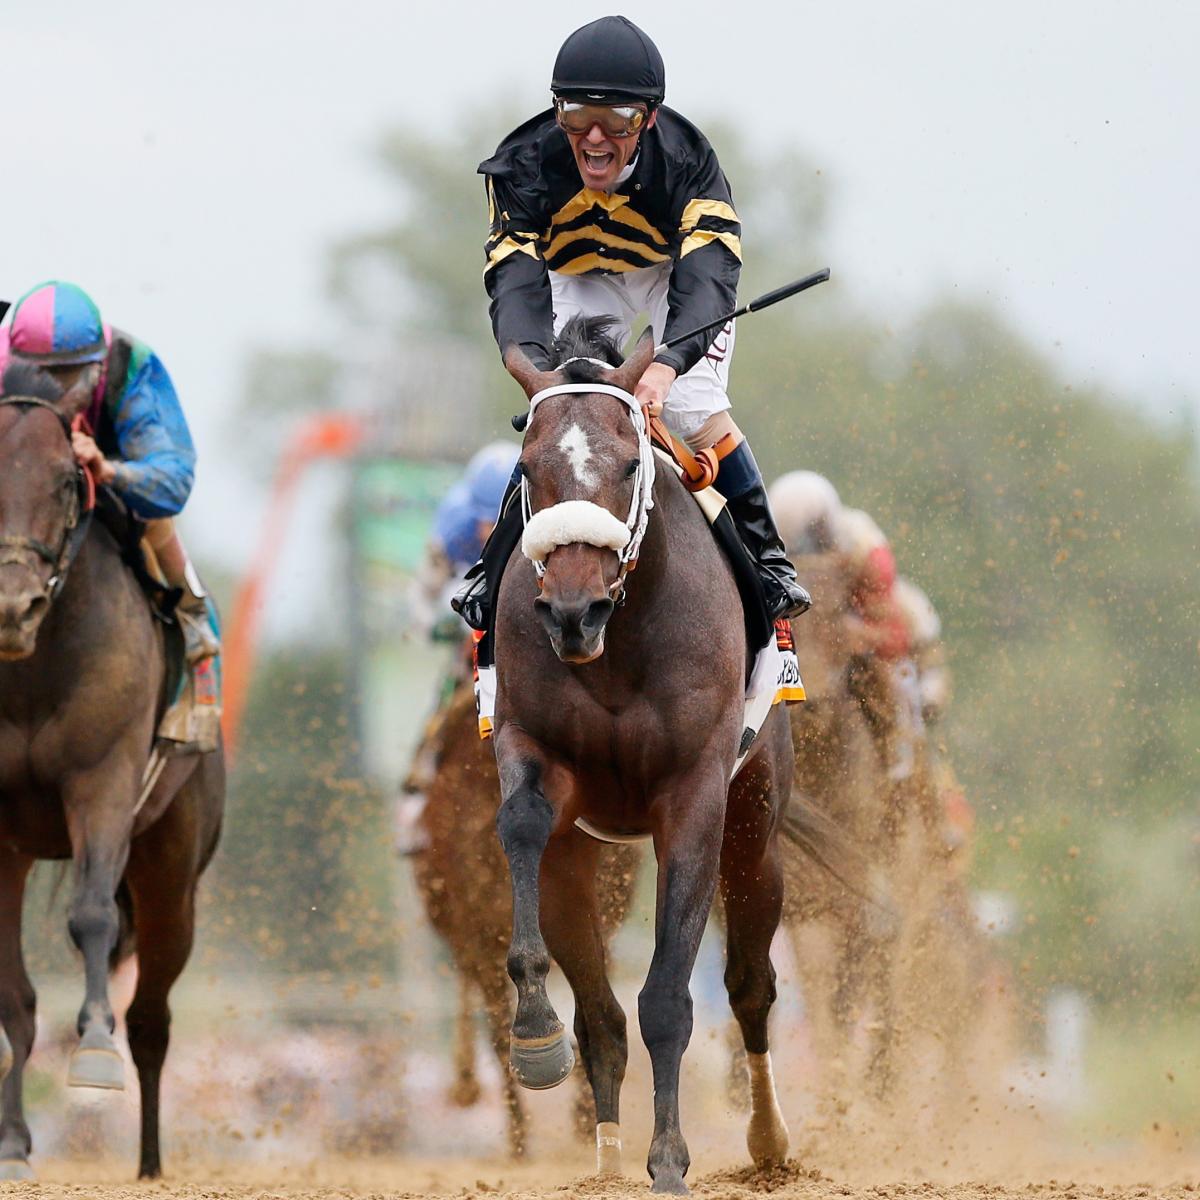 Preakness Results Full Breakdown of Finishers and Payouts News